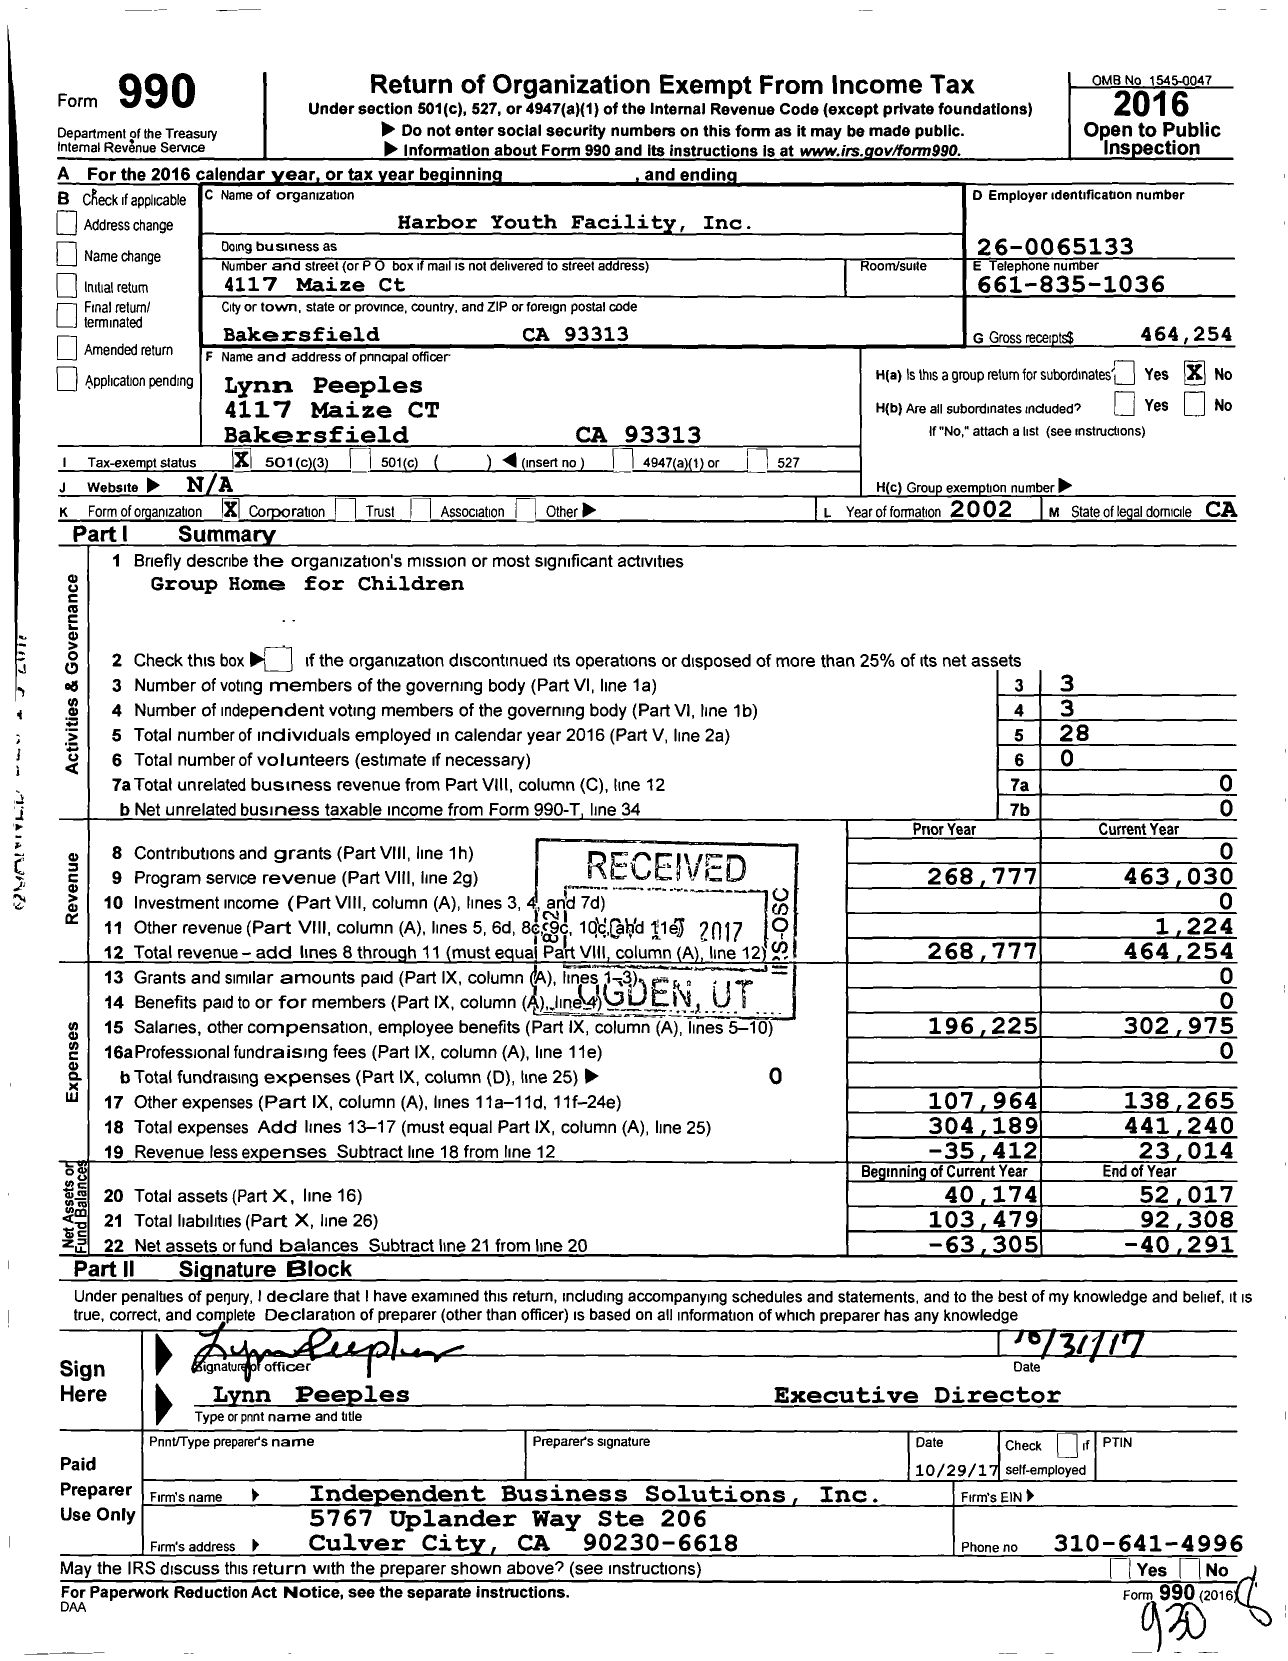 Image of first page of 2016 Form 990 for Harbor Youth Facility